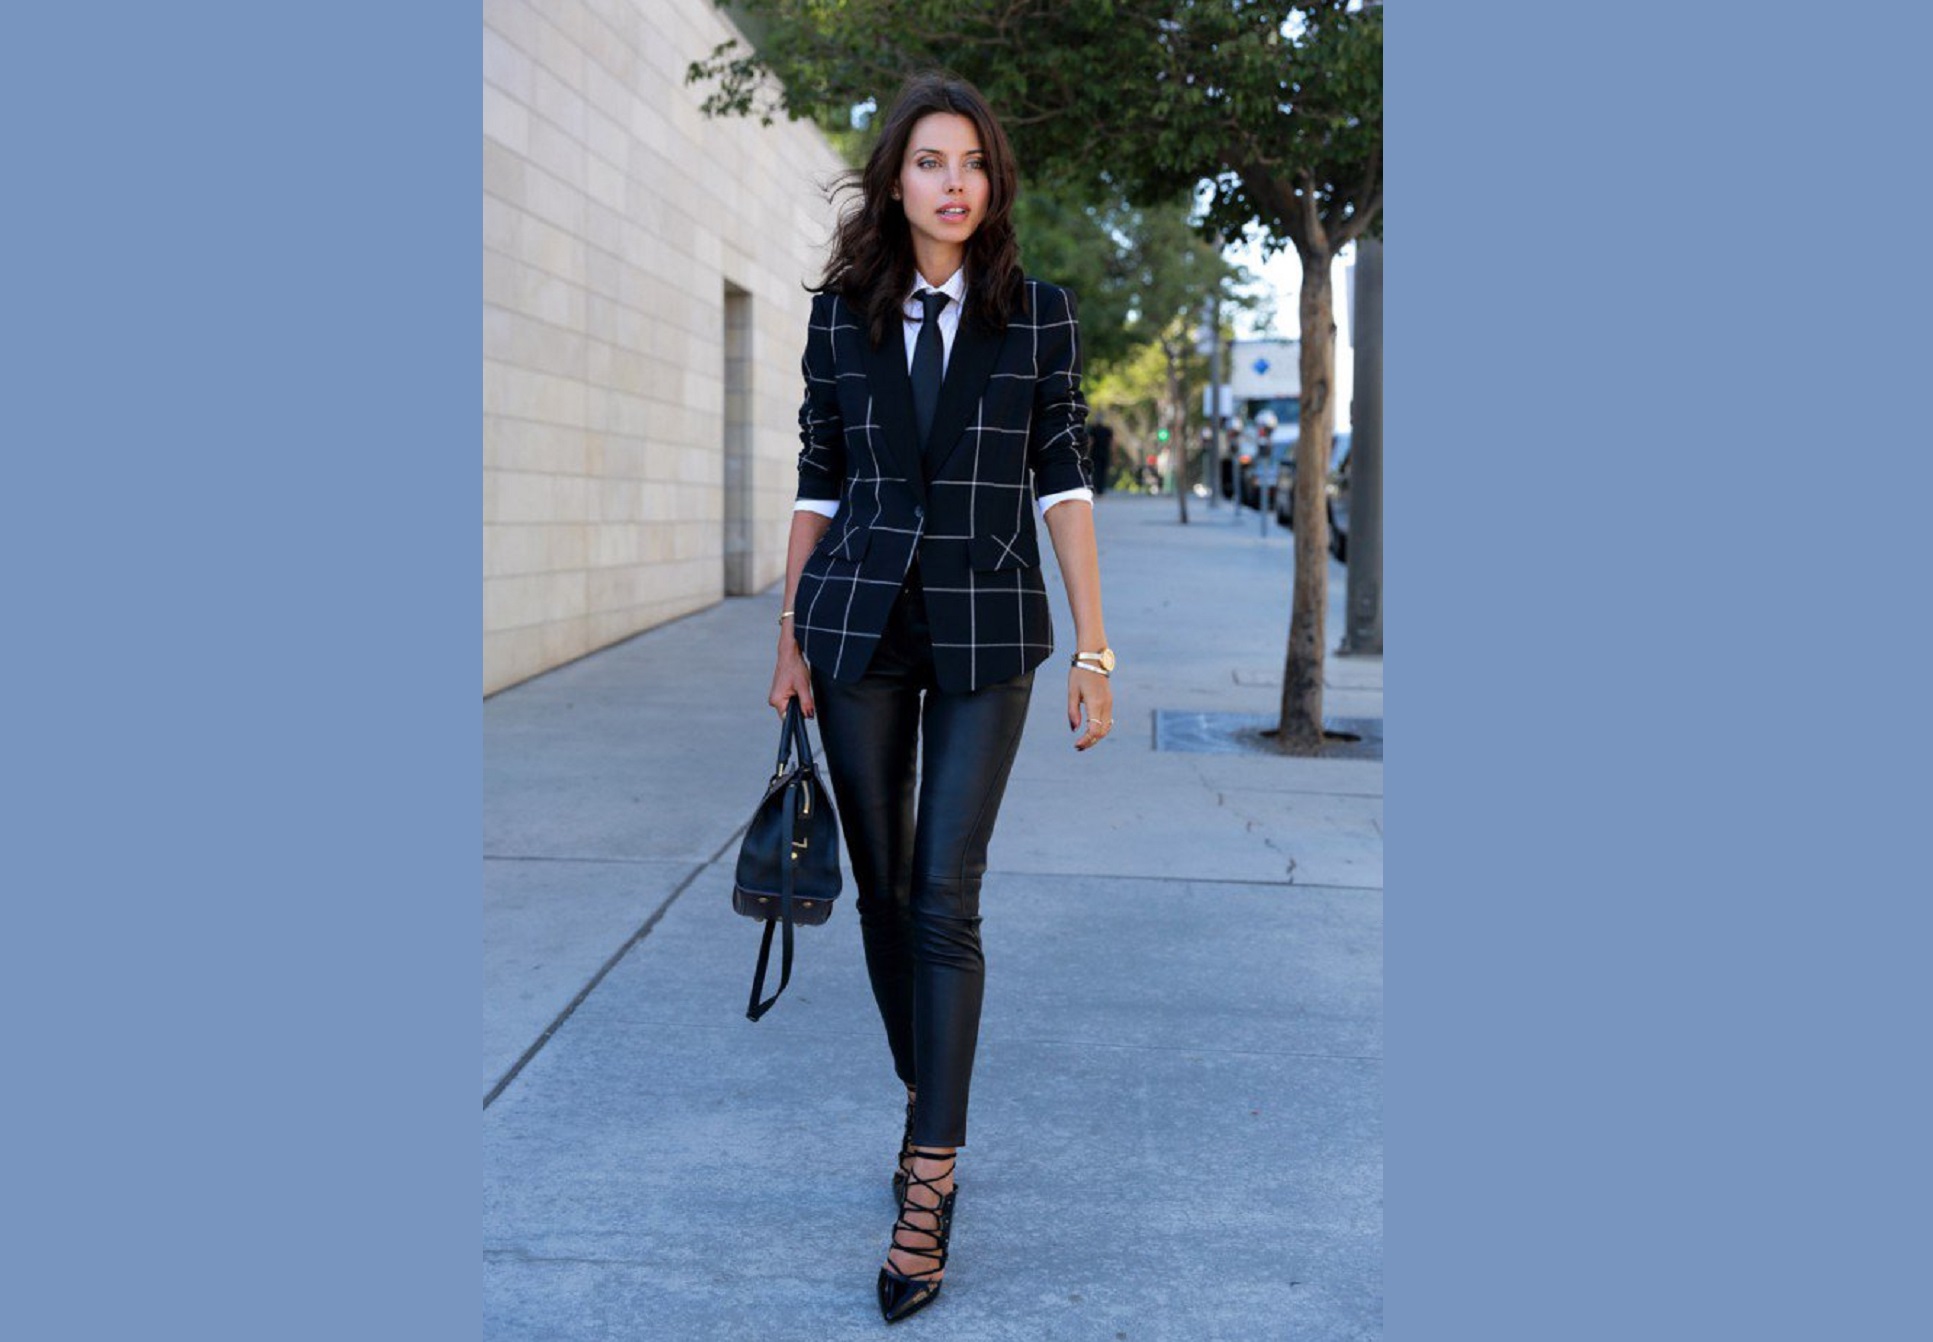 Blazer for Spring: 20 Stylish Outfit Ideas